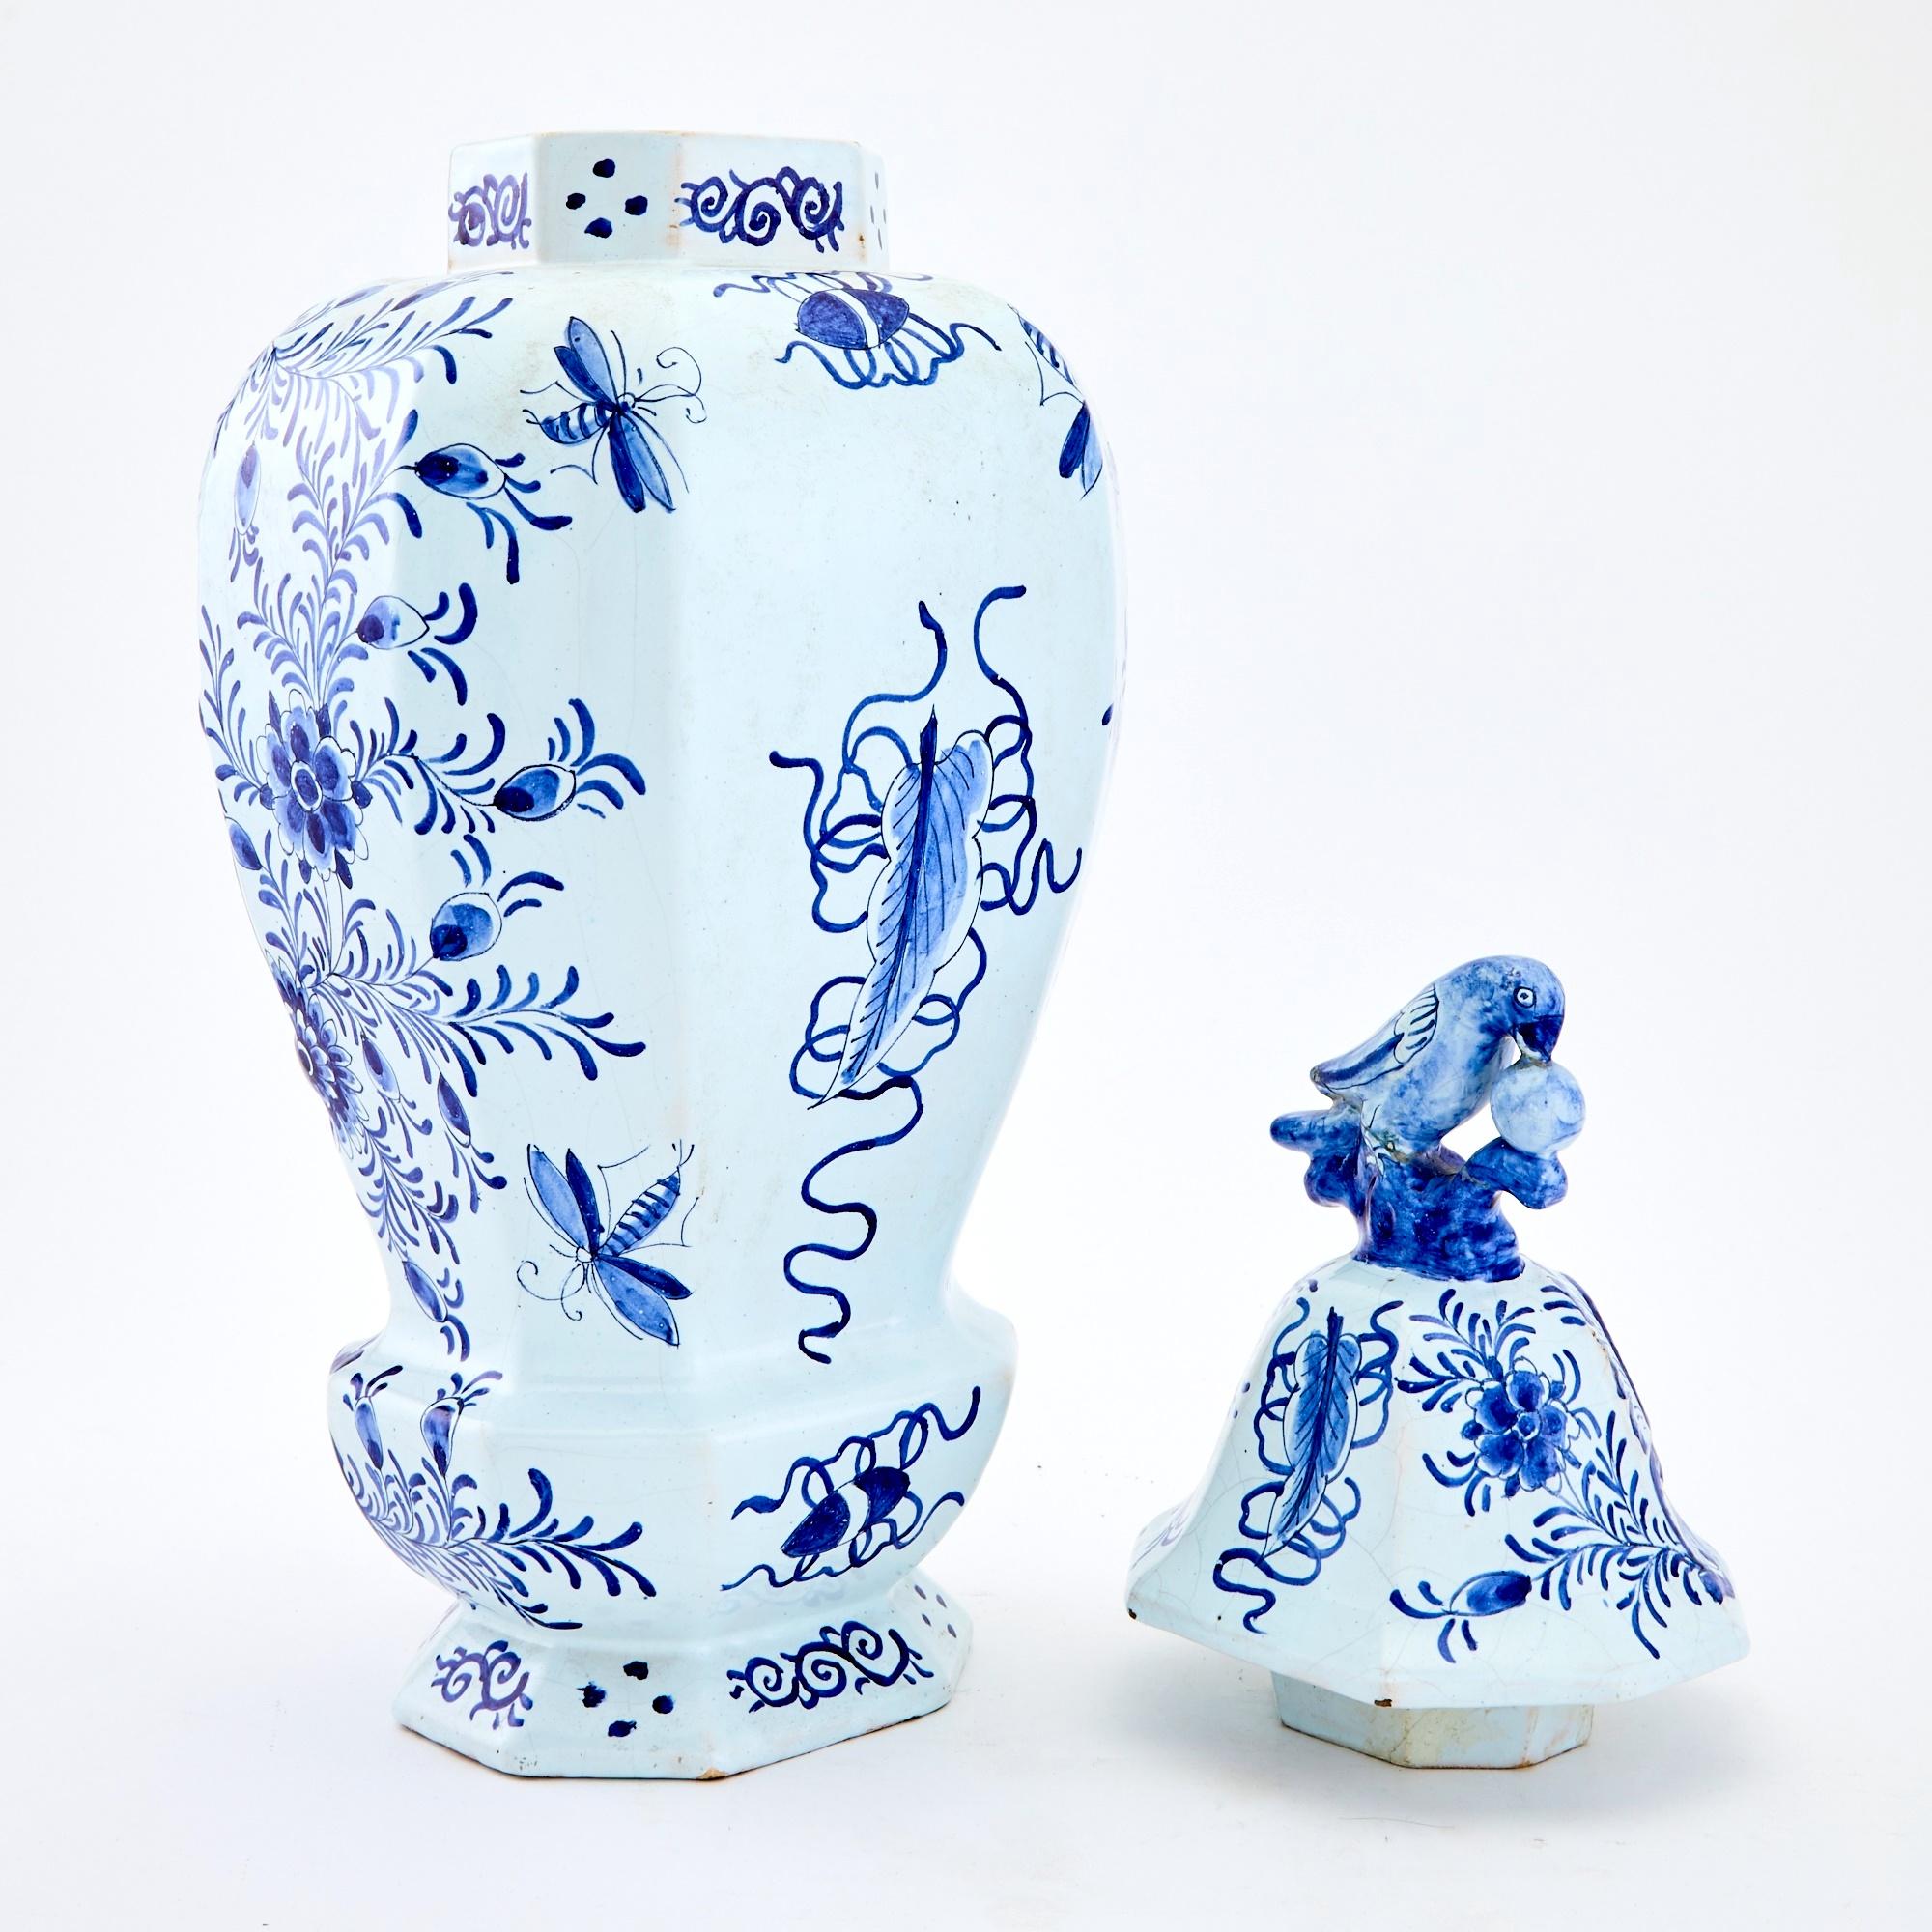 Step into the enchanting world of the early 19th century with this exquisite Dutch Delft blue and white glazed ceramic covered urn. Graced with timeless charm, this decorative piece boasts a captivating bird sculpture finial that adorns its crown